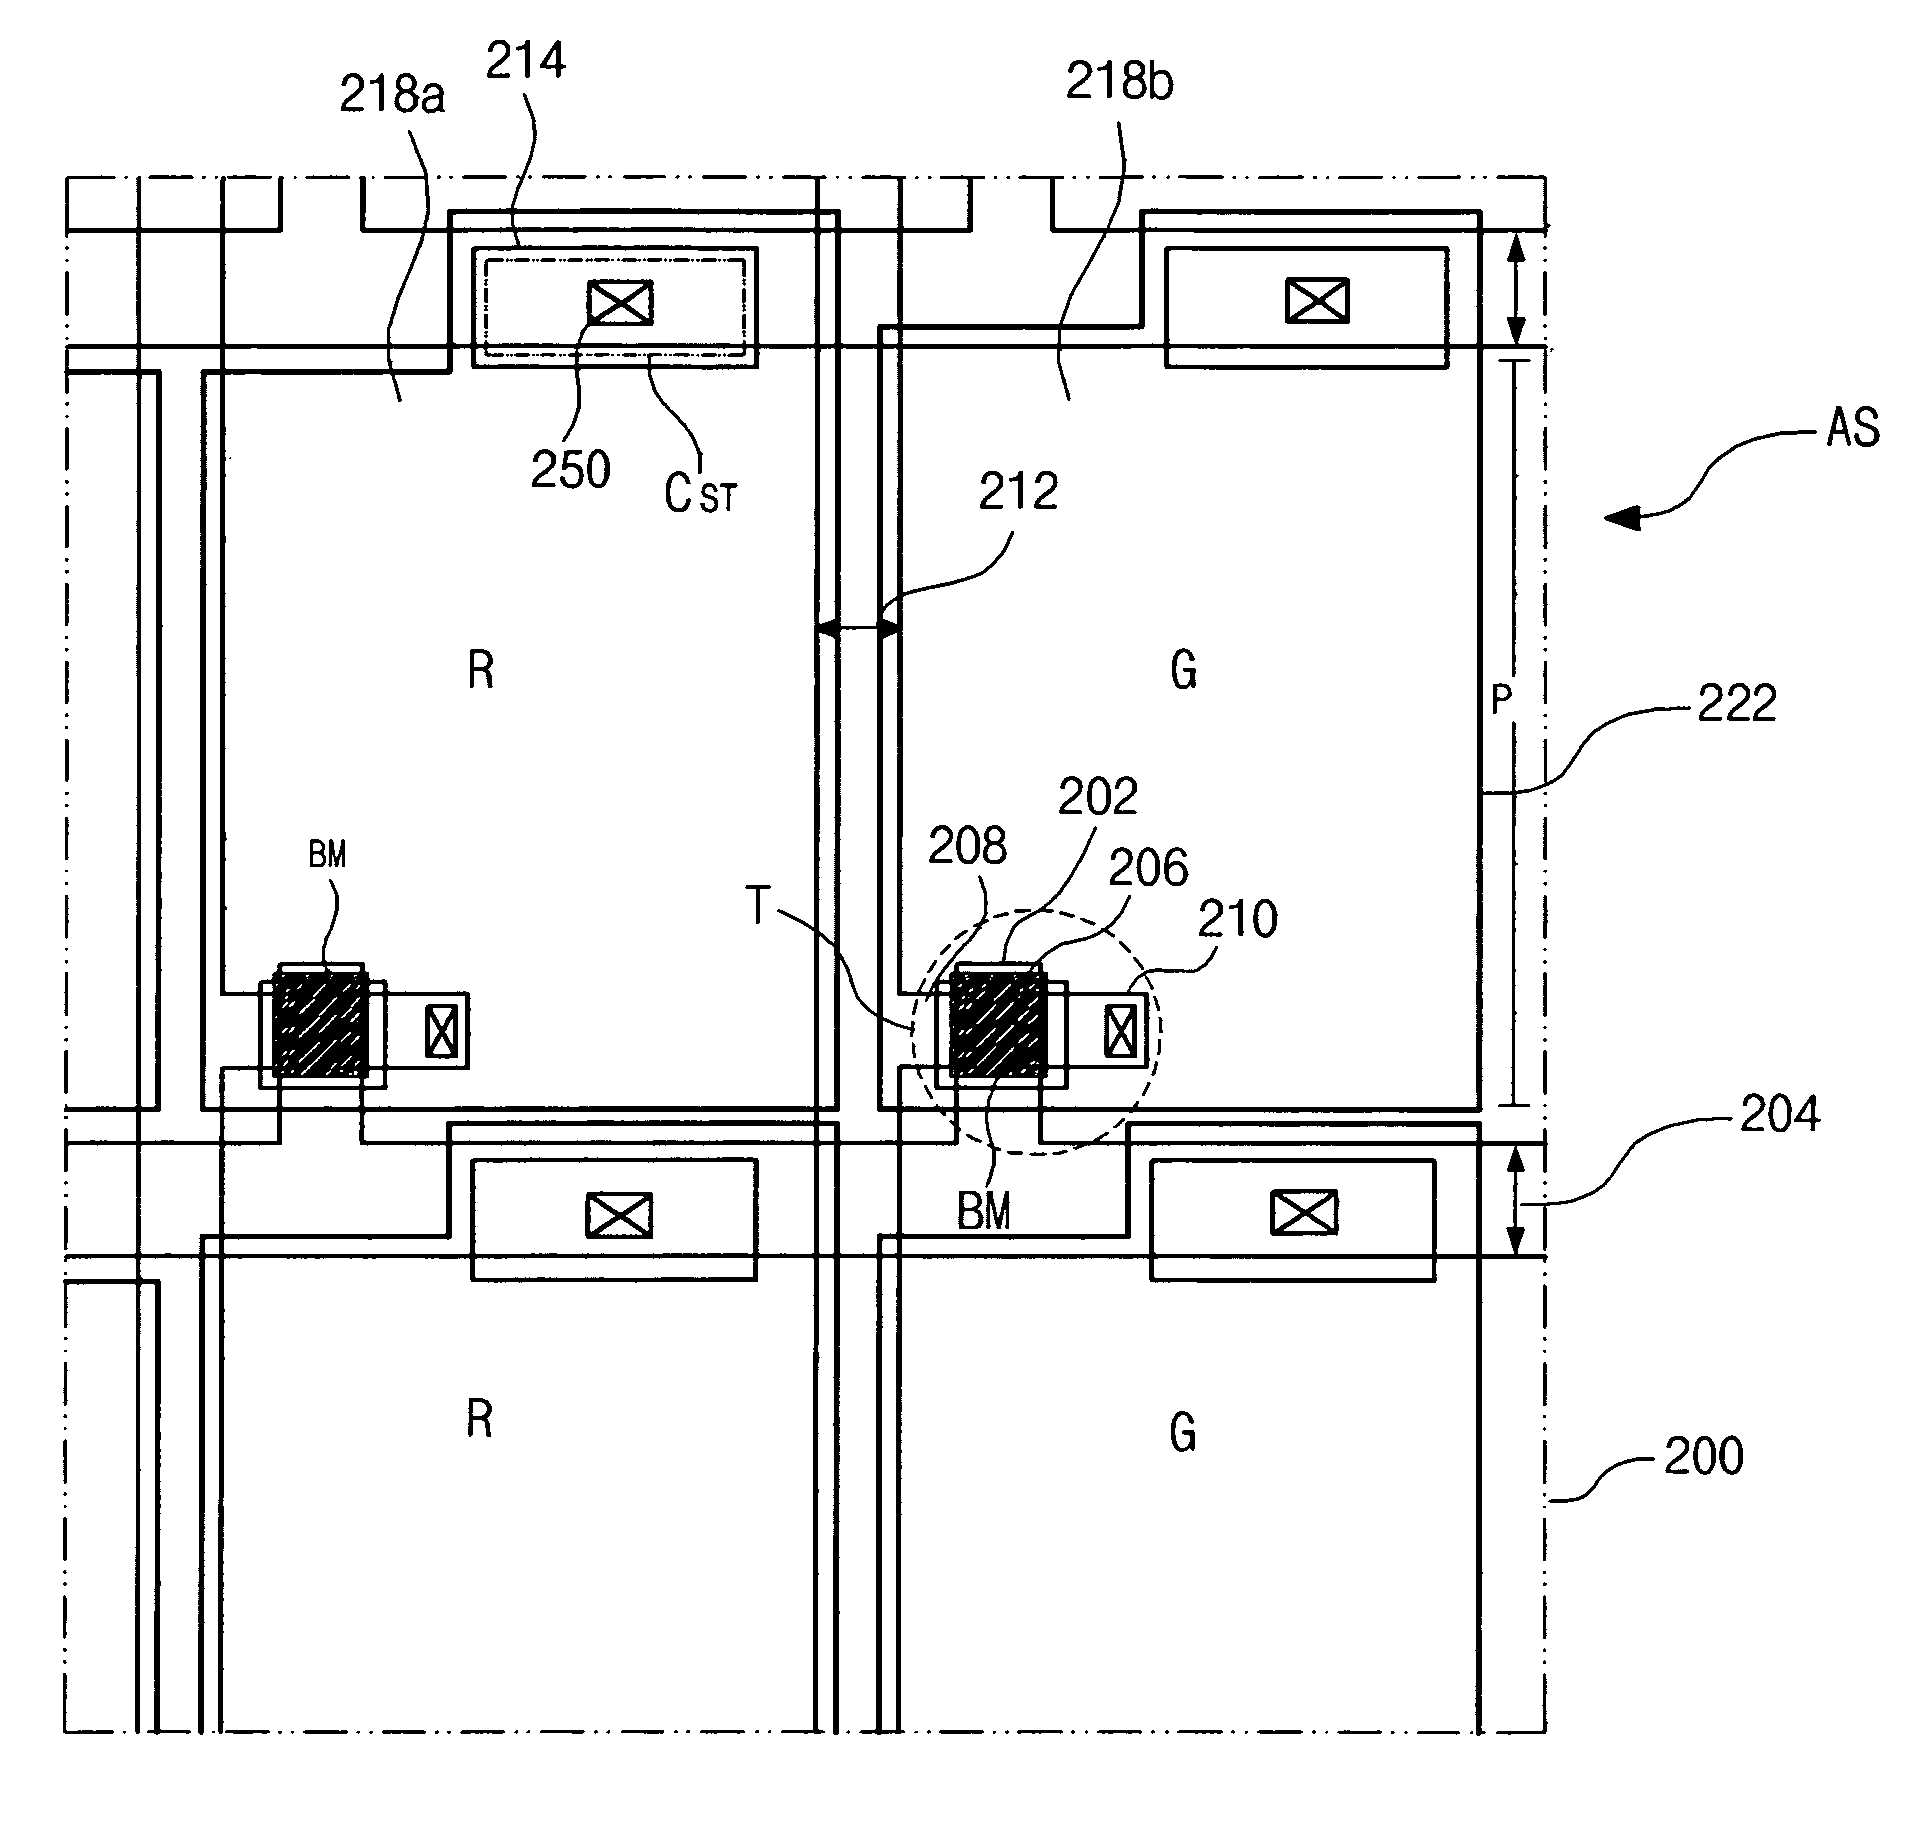 Liquid crystal display device comprising a black matrix including carbon particles coated with an insulating material, metallic titanium particles, and a color pigment